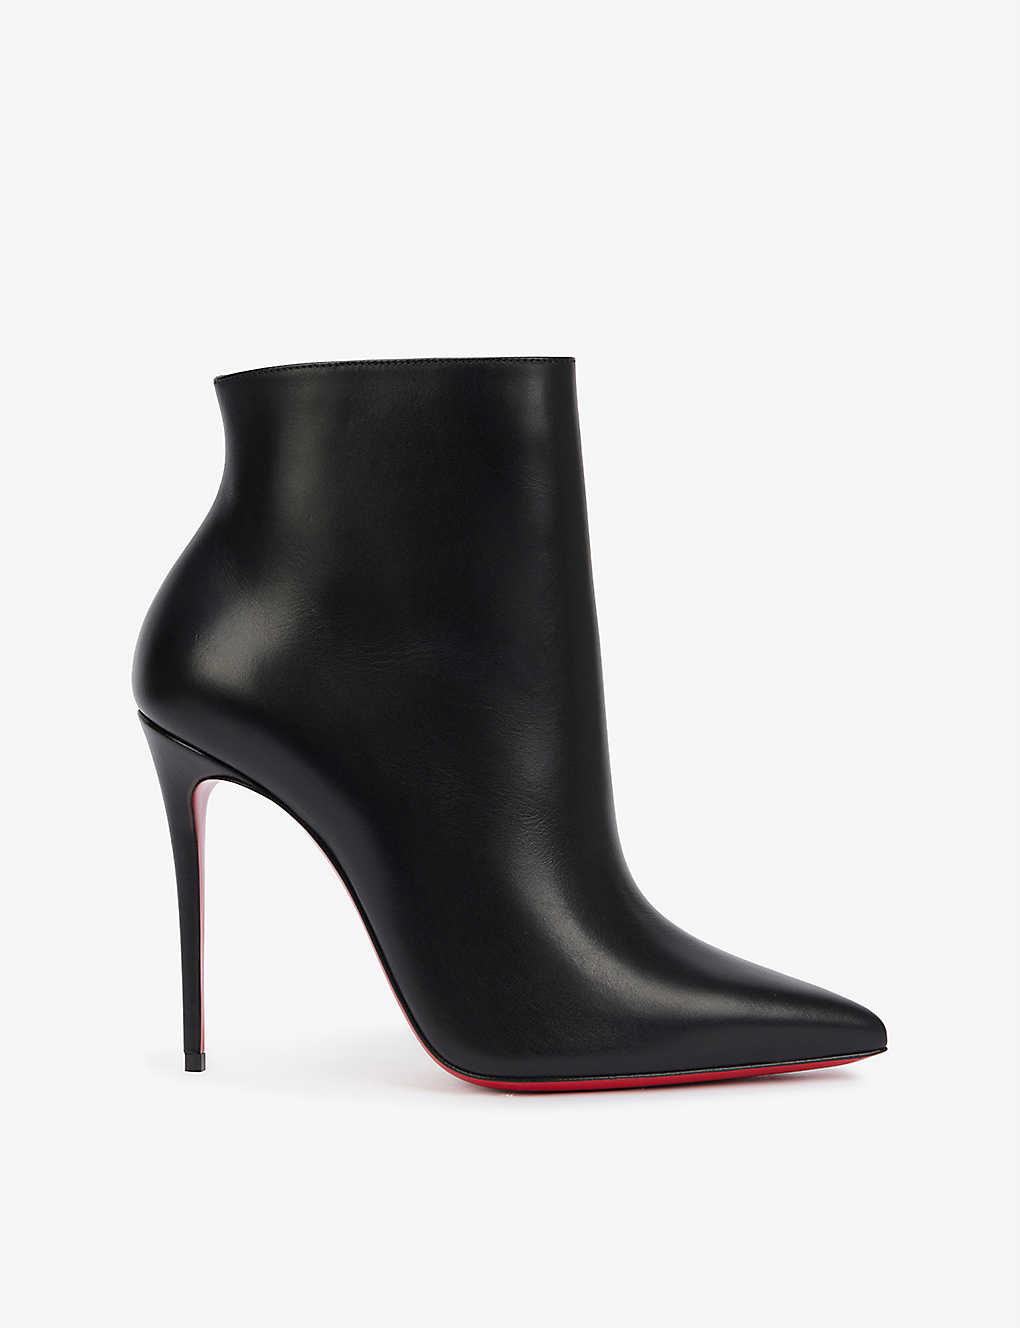 Christian Louboutin Womens Black So Kate 100 Leather Heeled Ankle-boot